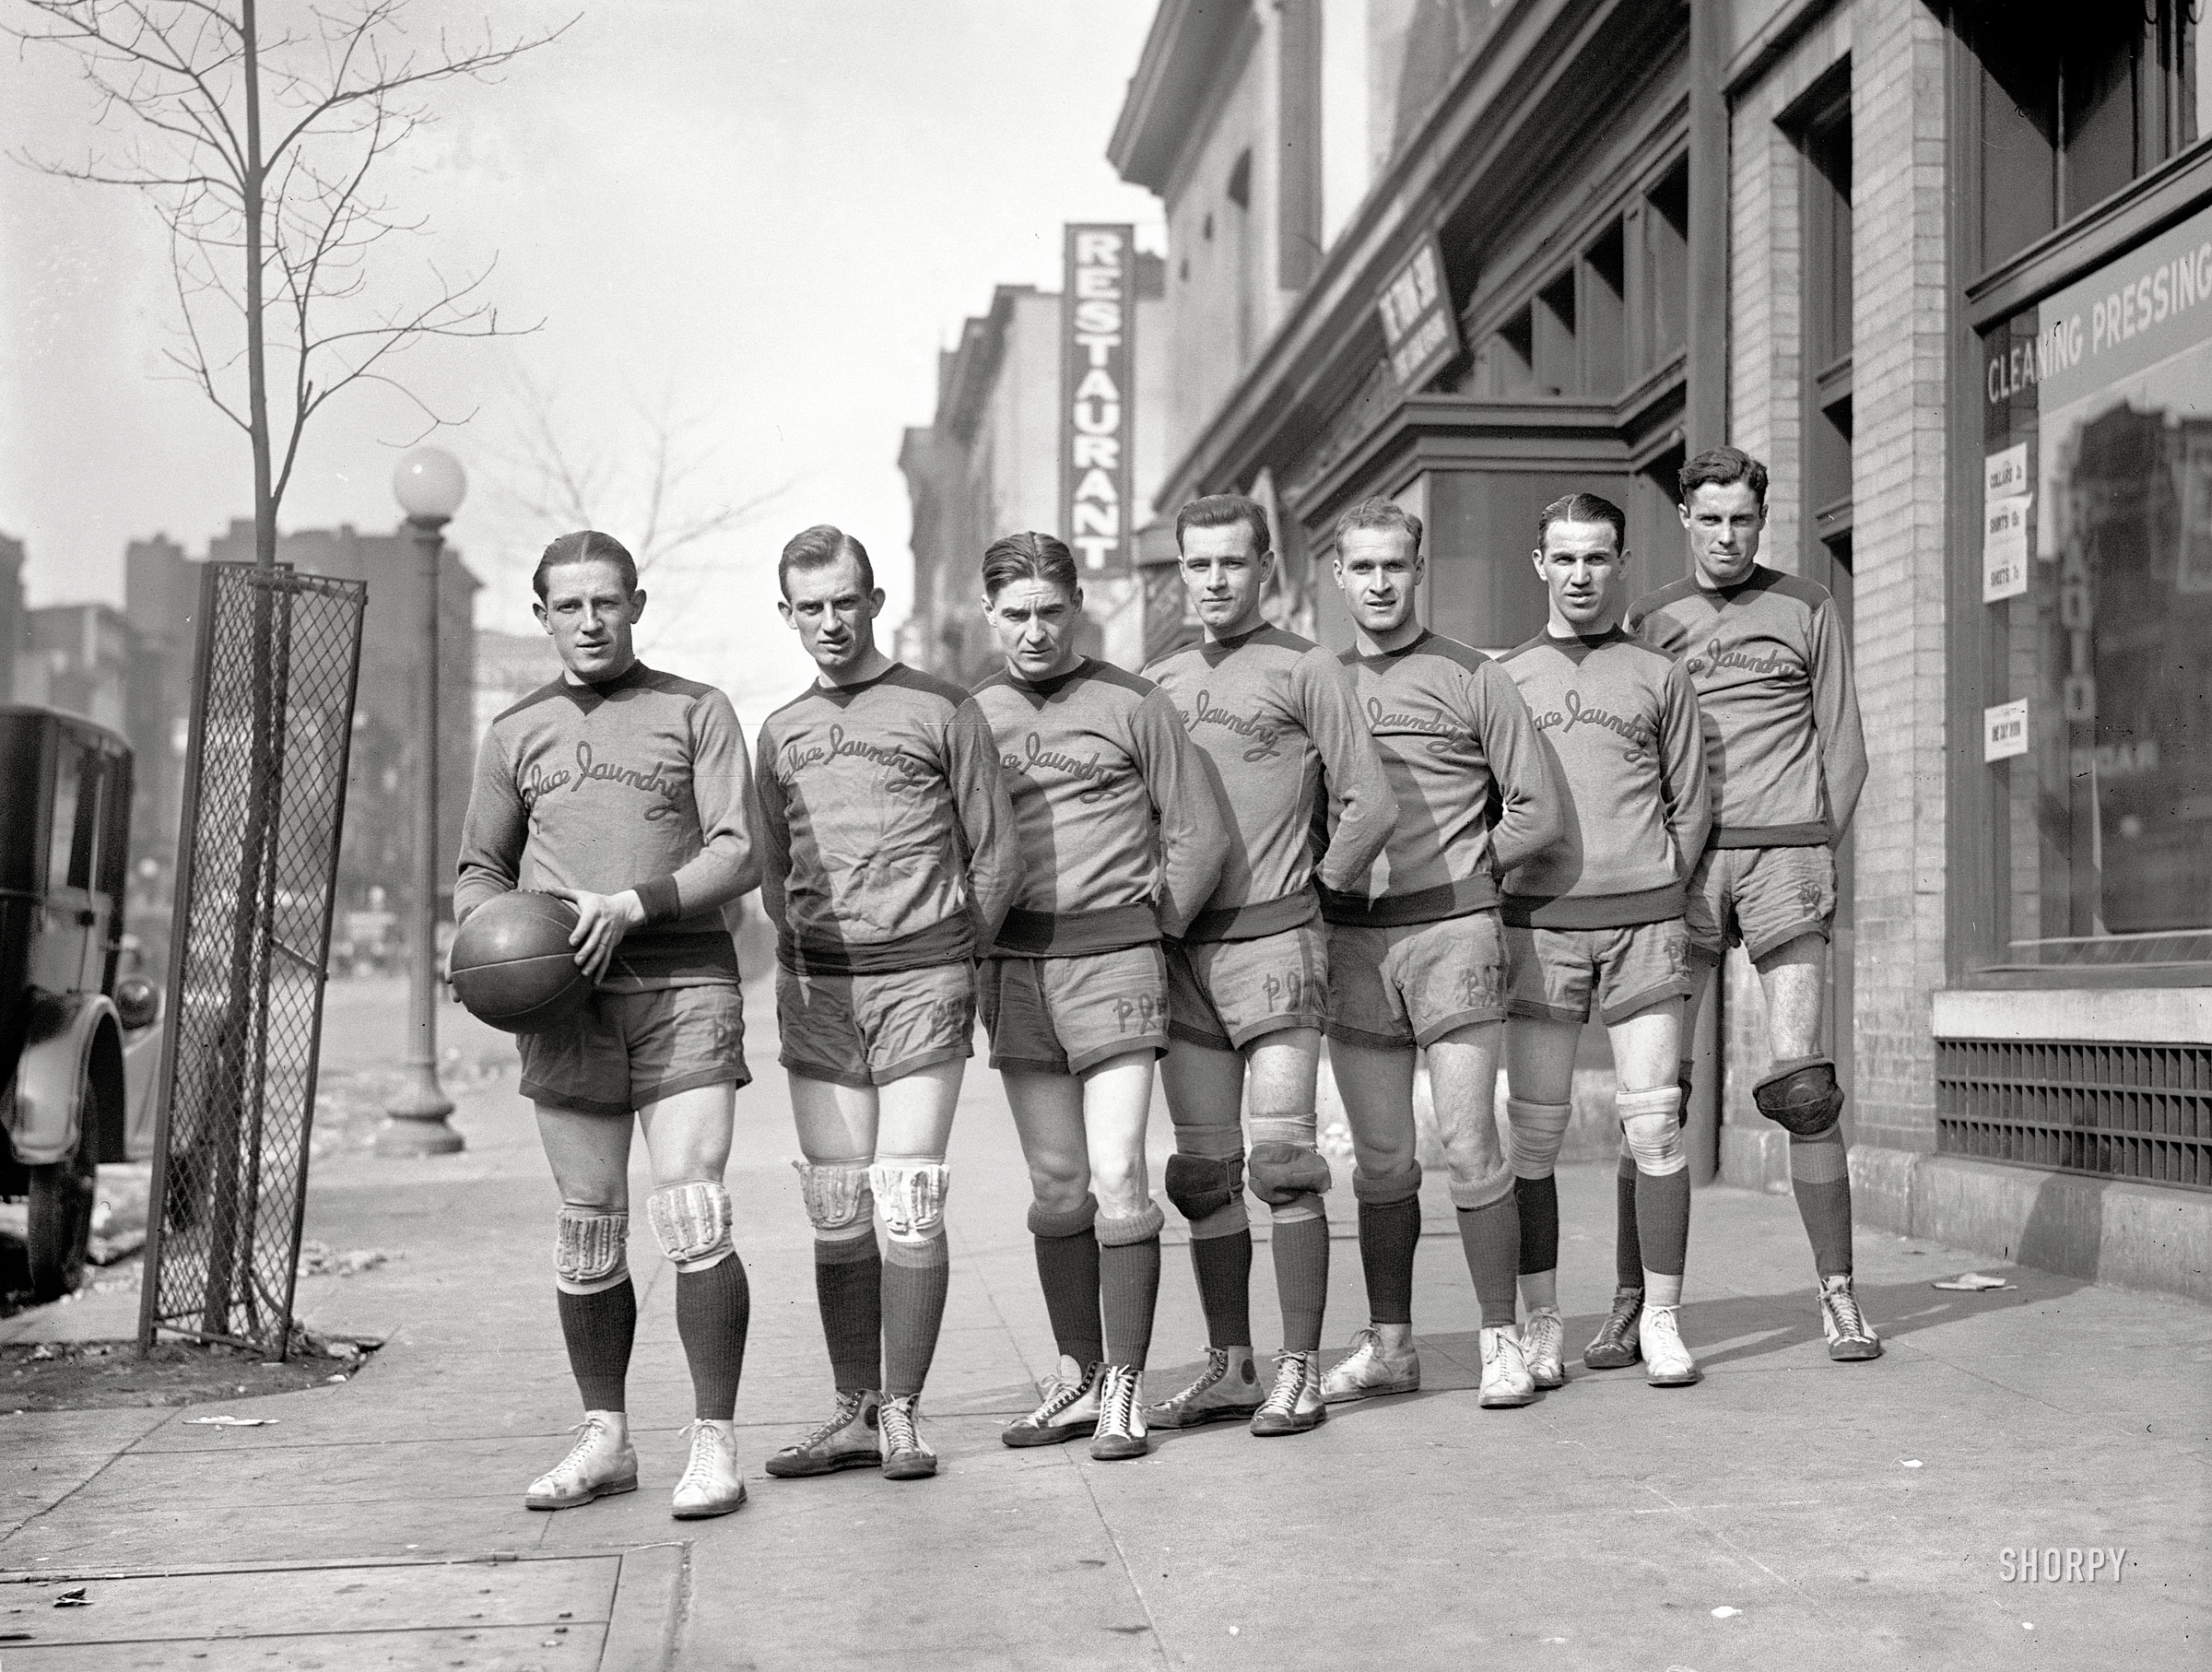 "Palace Laundry, 1924." The following year the team sponsored by this Washington, D.C., laundry became the Palace Club, a franchise of the American Professional Basketball League. National Photo glass negative. View full size.